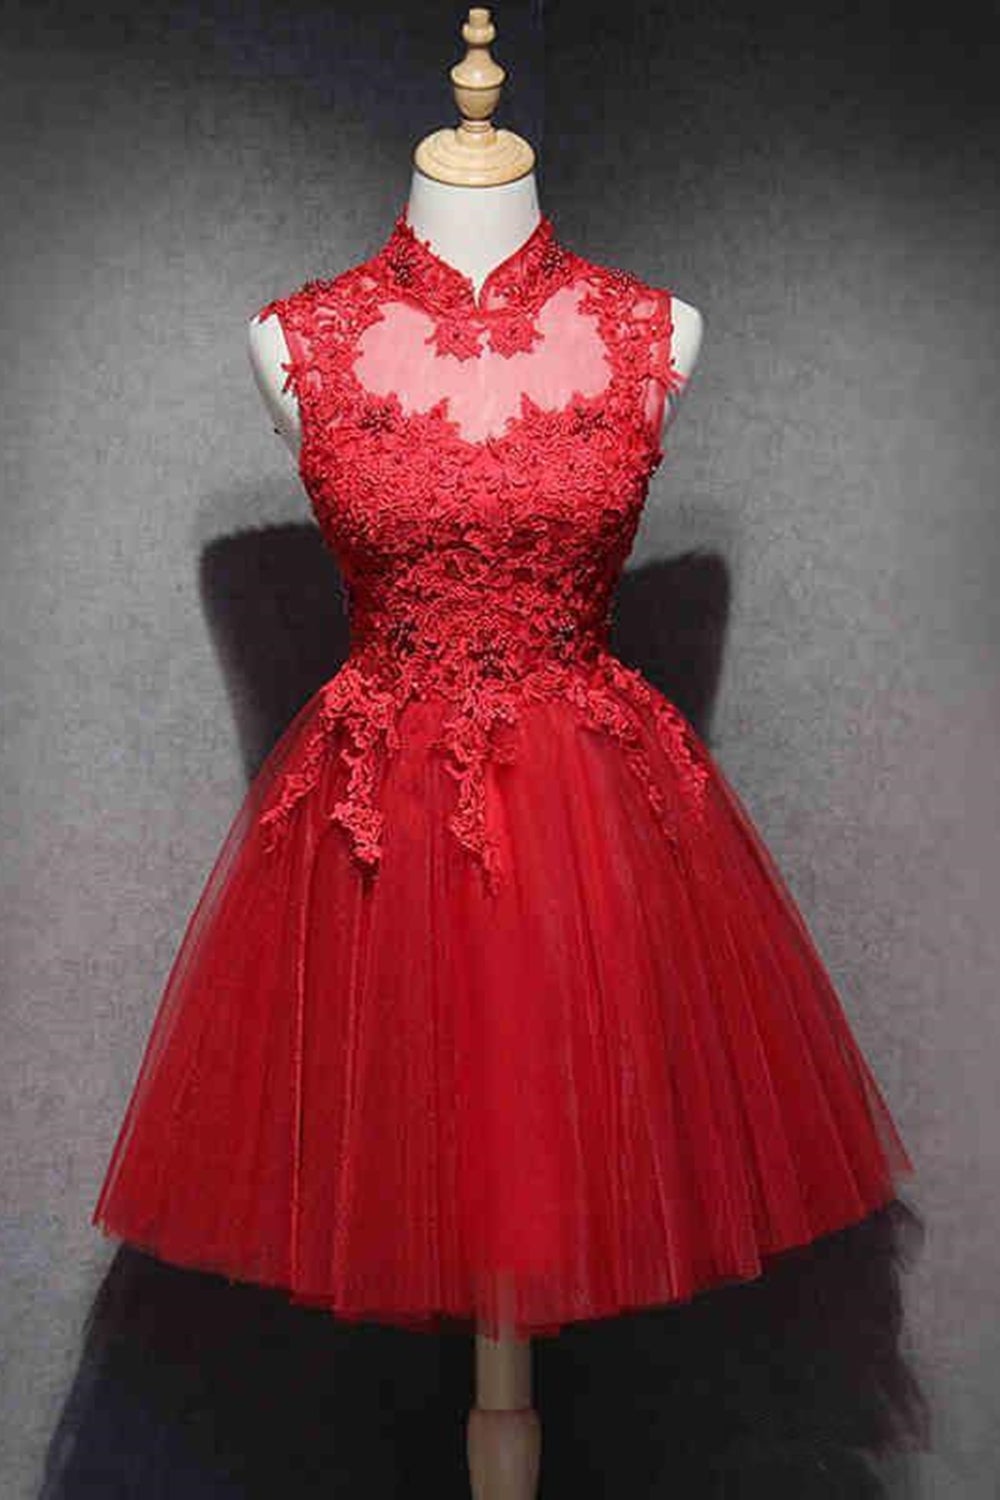 Party Dress Fancy, High Neck Red Lace Short Prom Dress,Homecoming Dresses,Red Formal Graduation Evening Dress